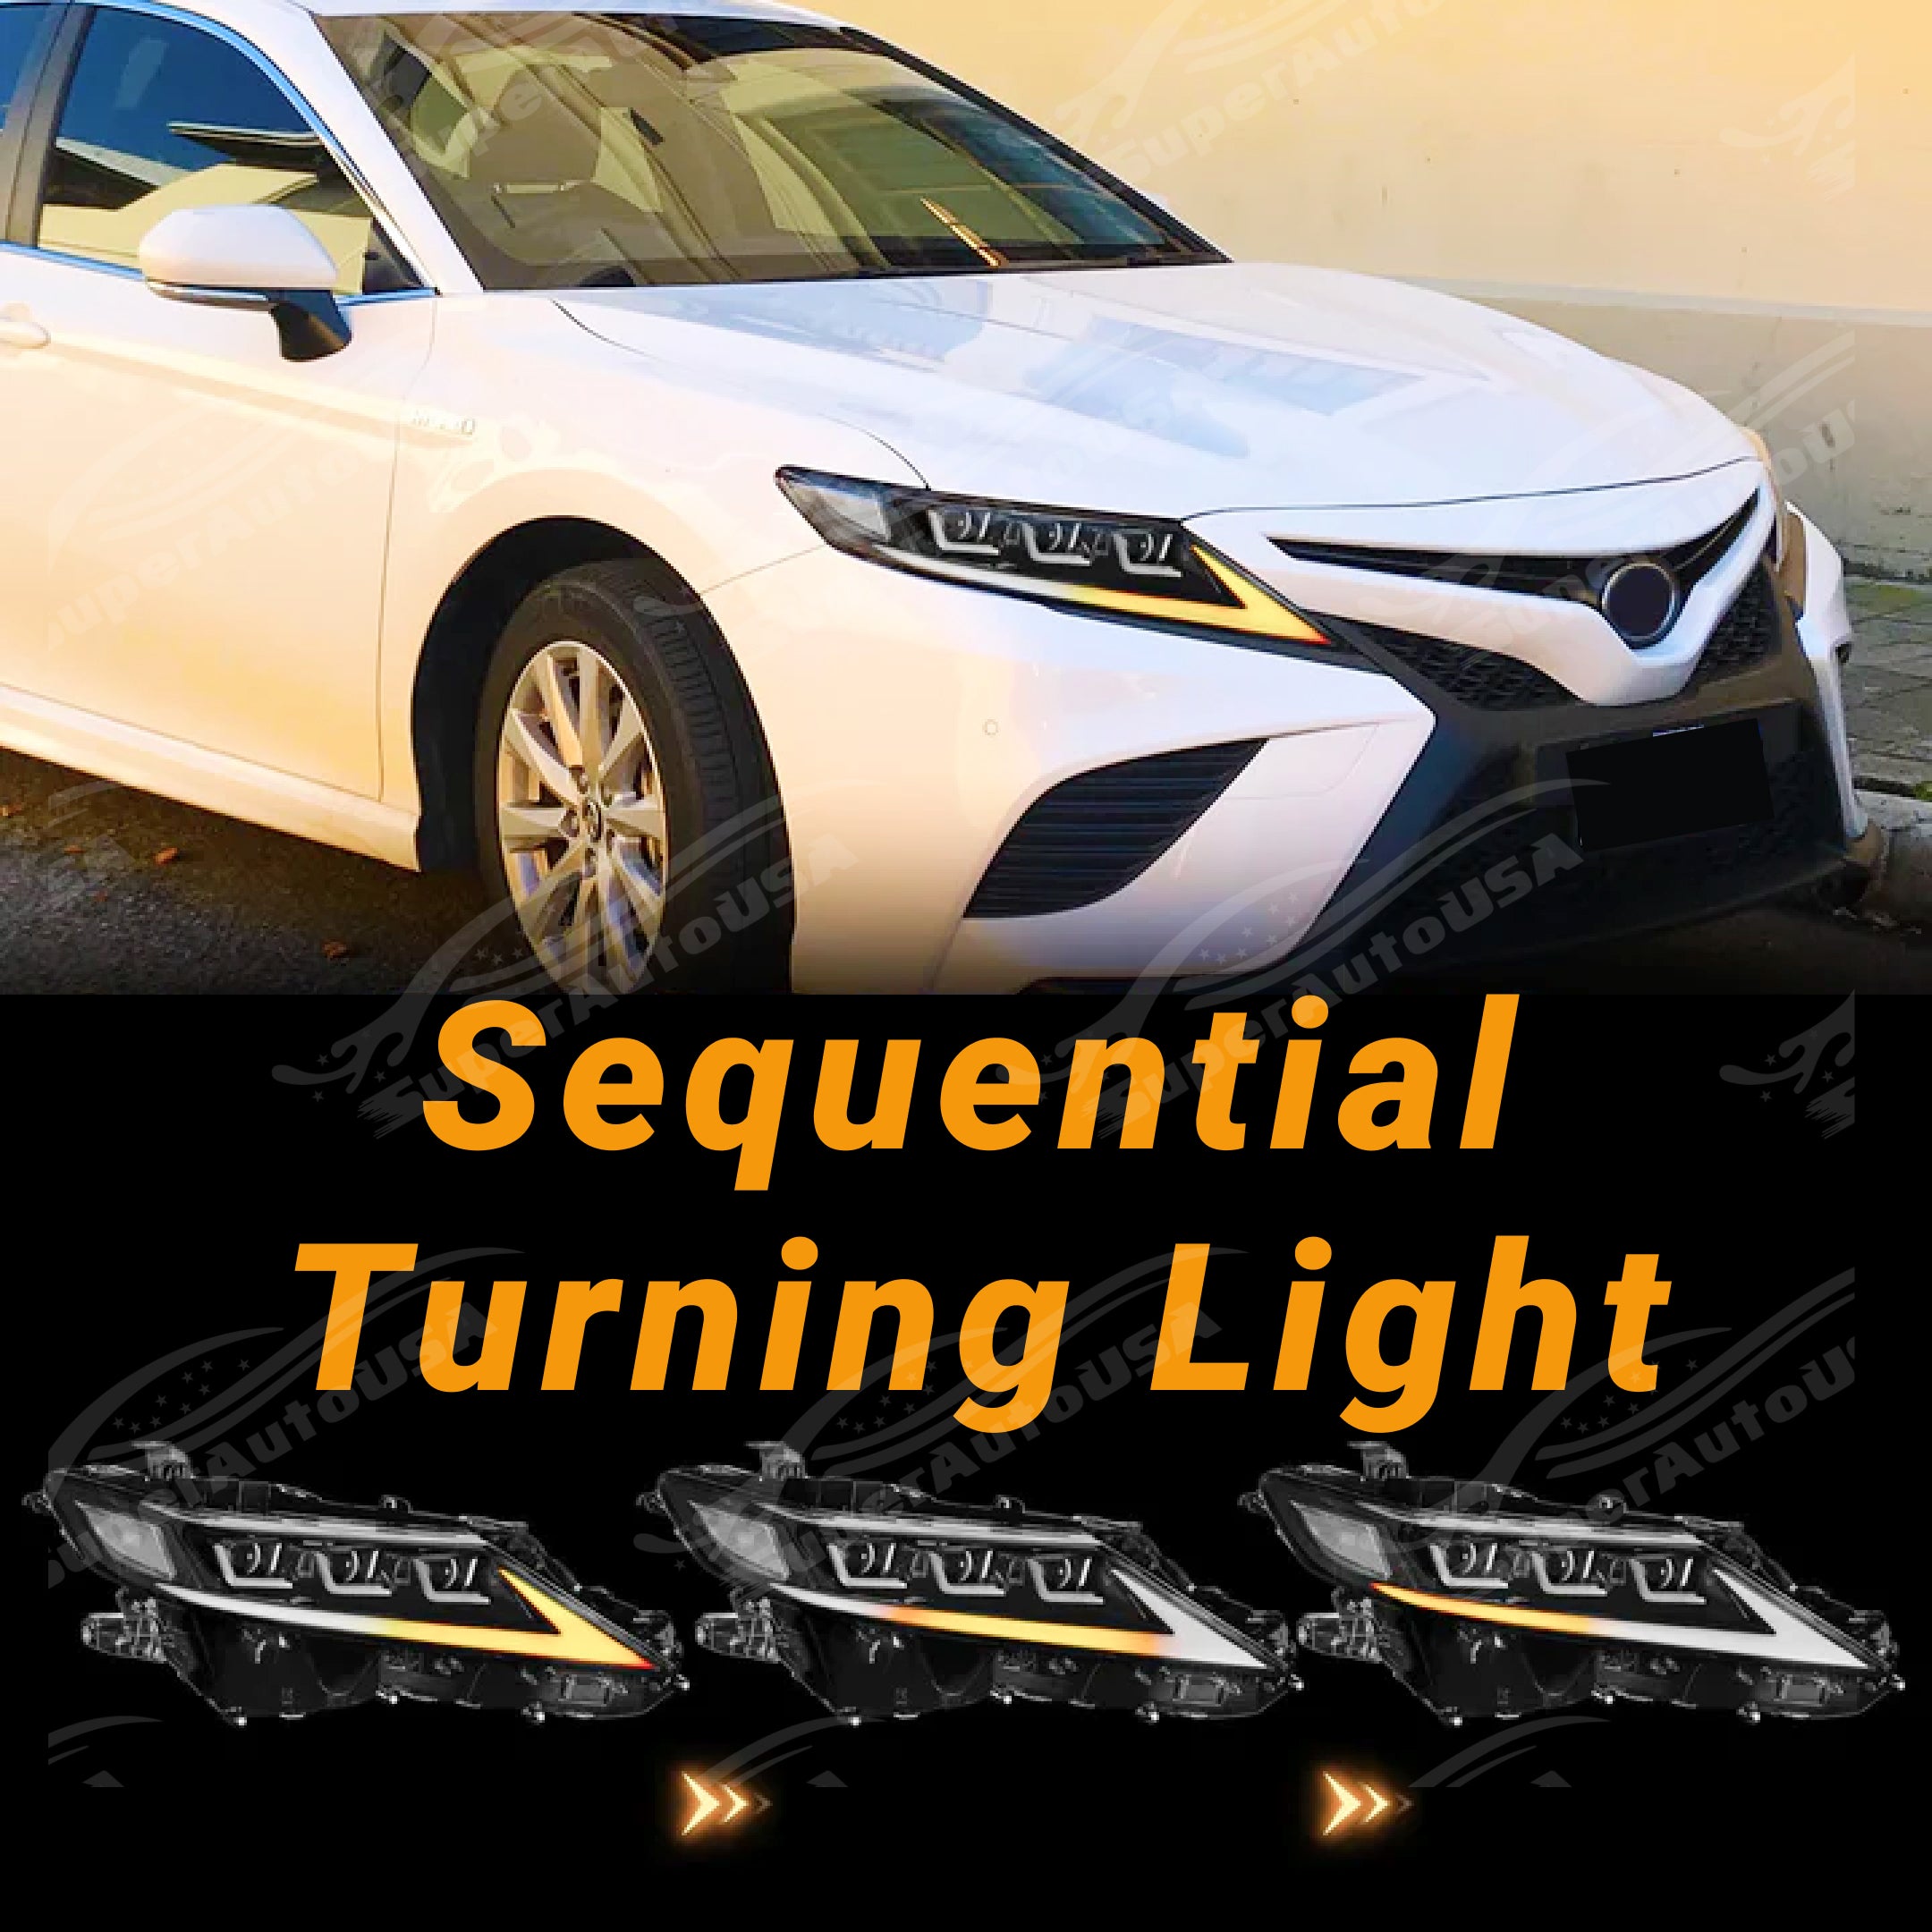 Fits Toyota Camry 2018-2024 LED Head Light Sequential Assembly